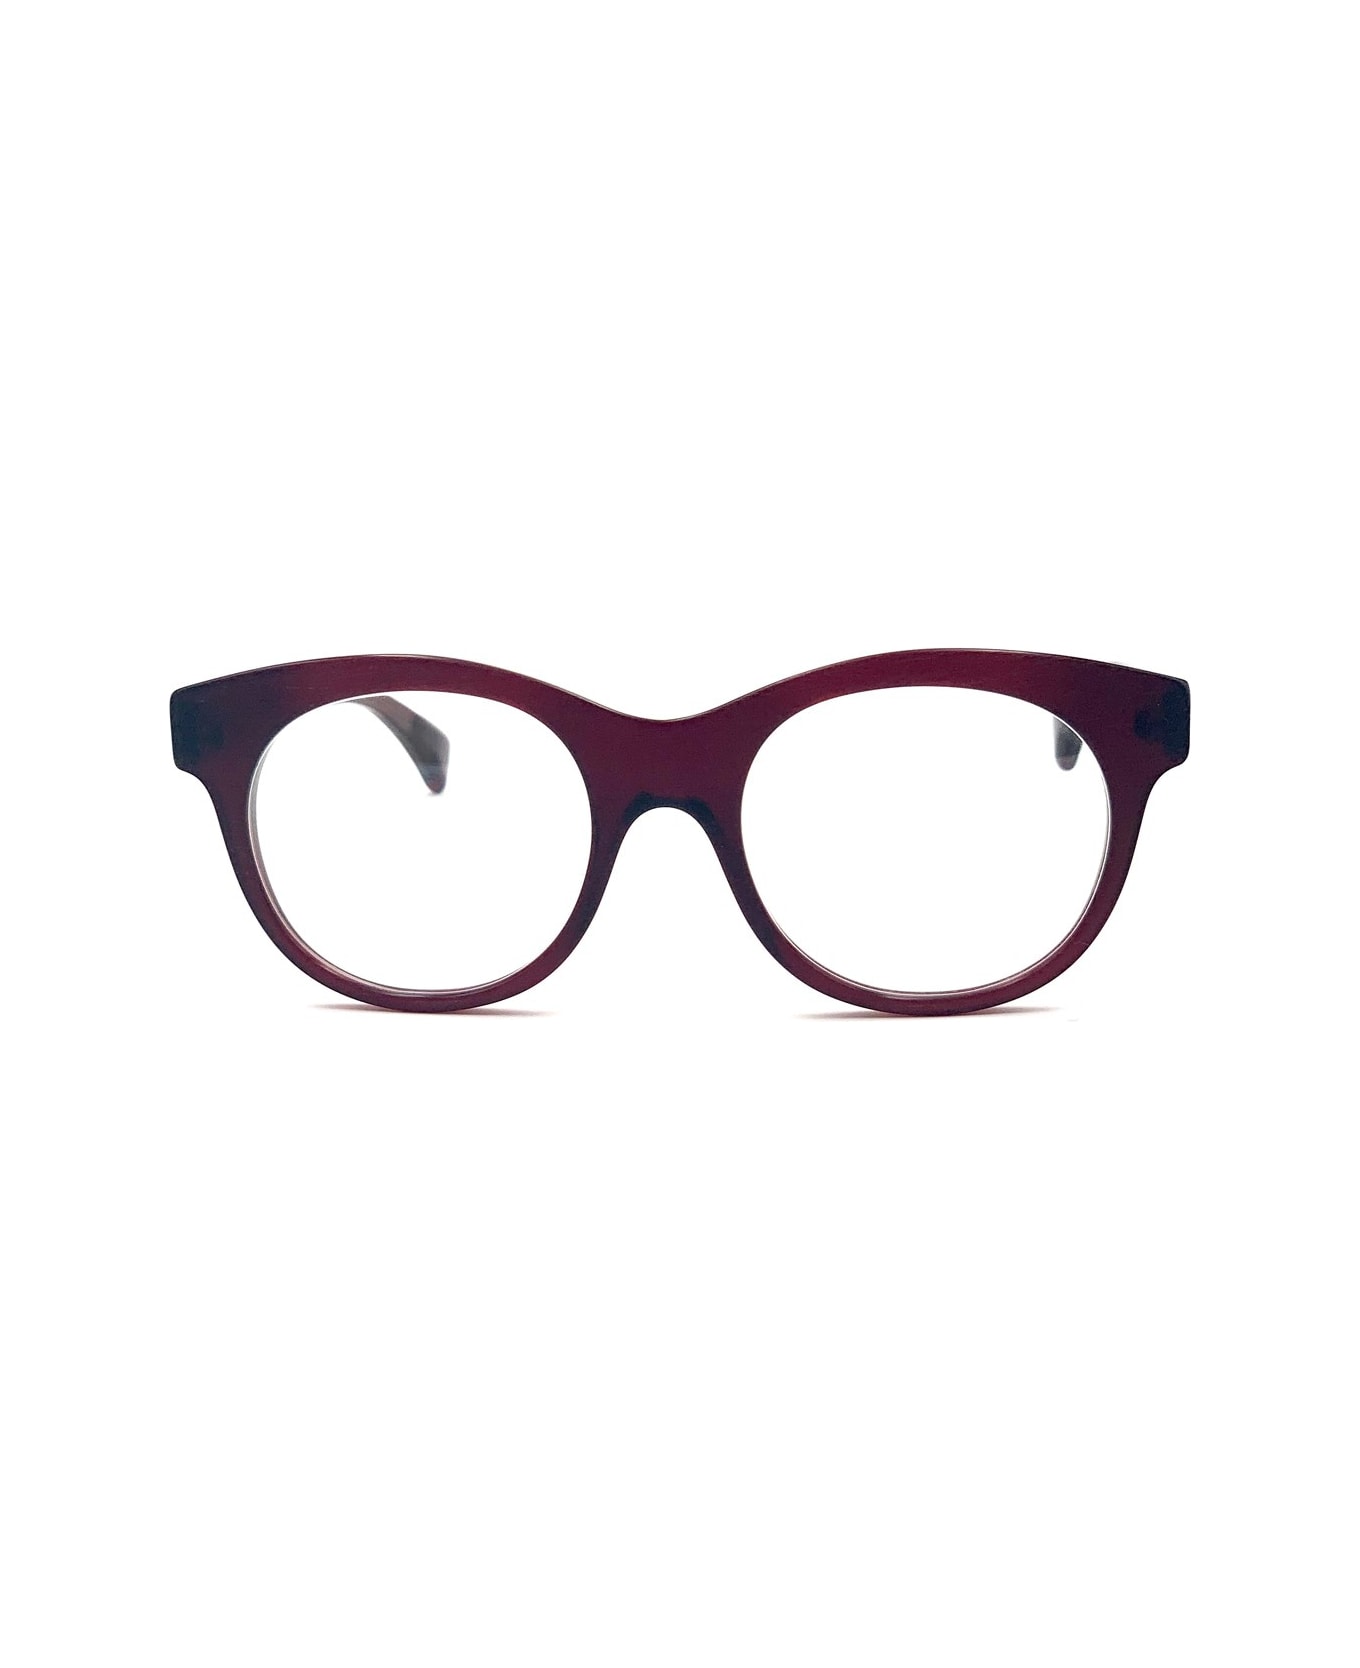 Jacques Durand Port-cros Xl170 Glasses - Rosso アイウェア